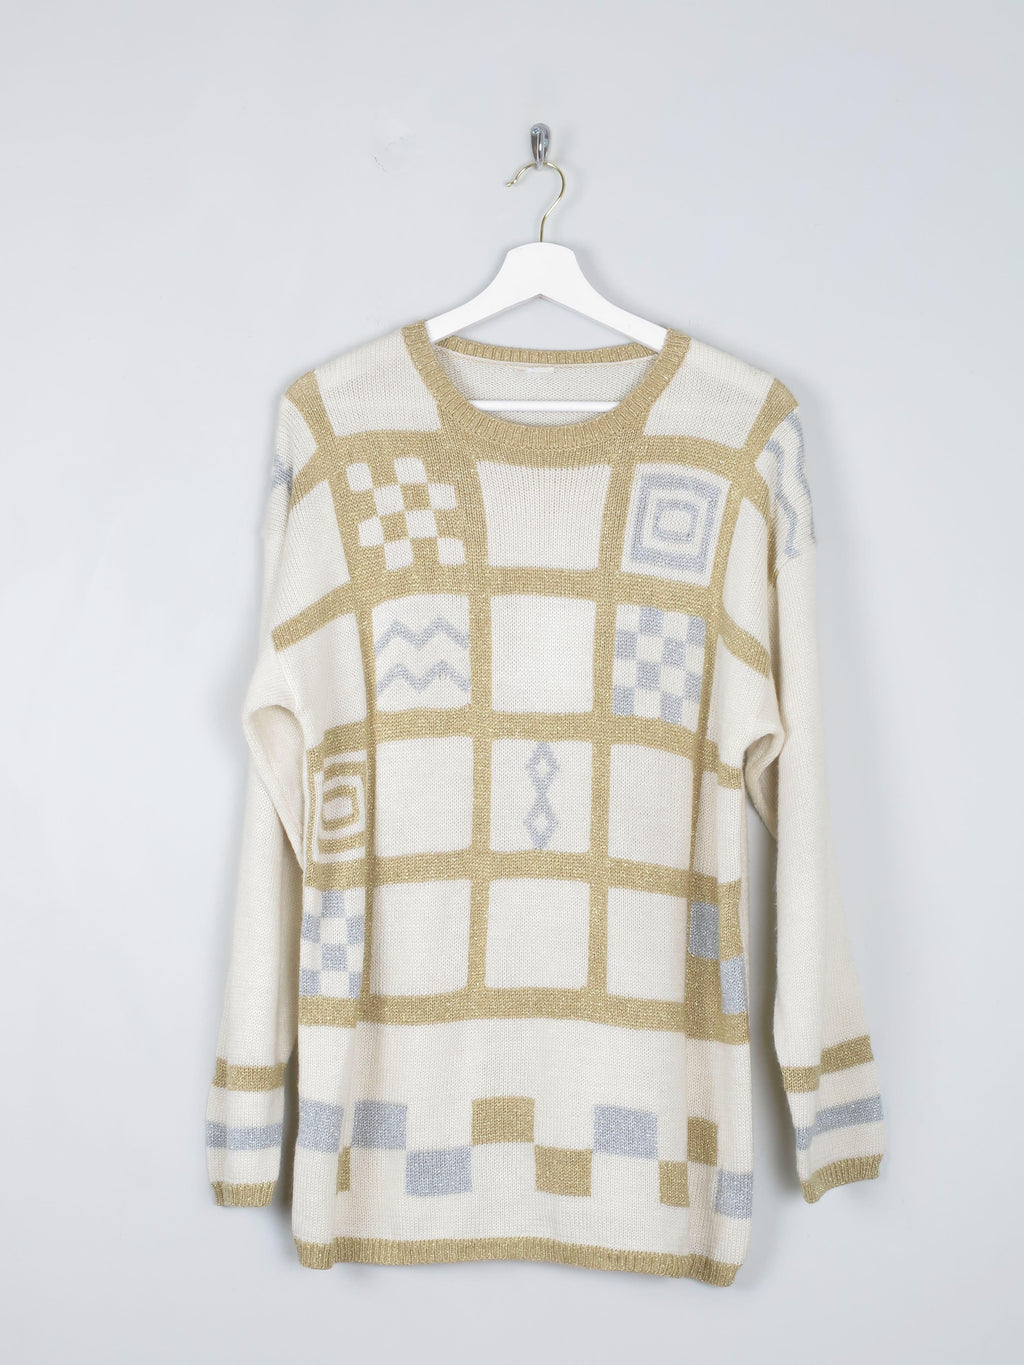 Women’s Vintage Gold & Silver Knitted Jumper S-L - The Harlequin